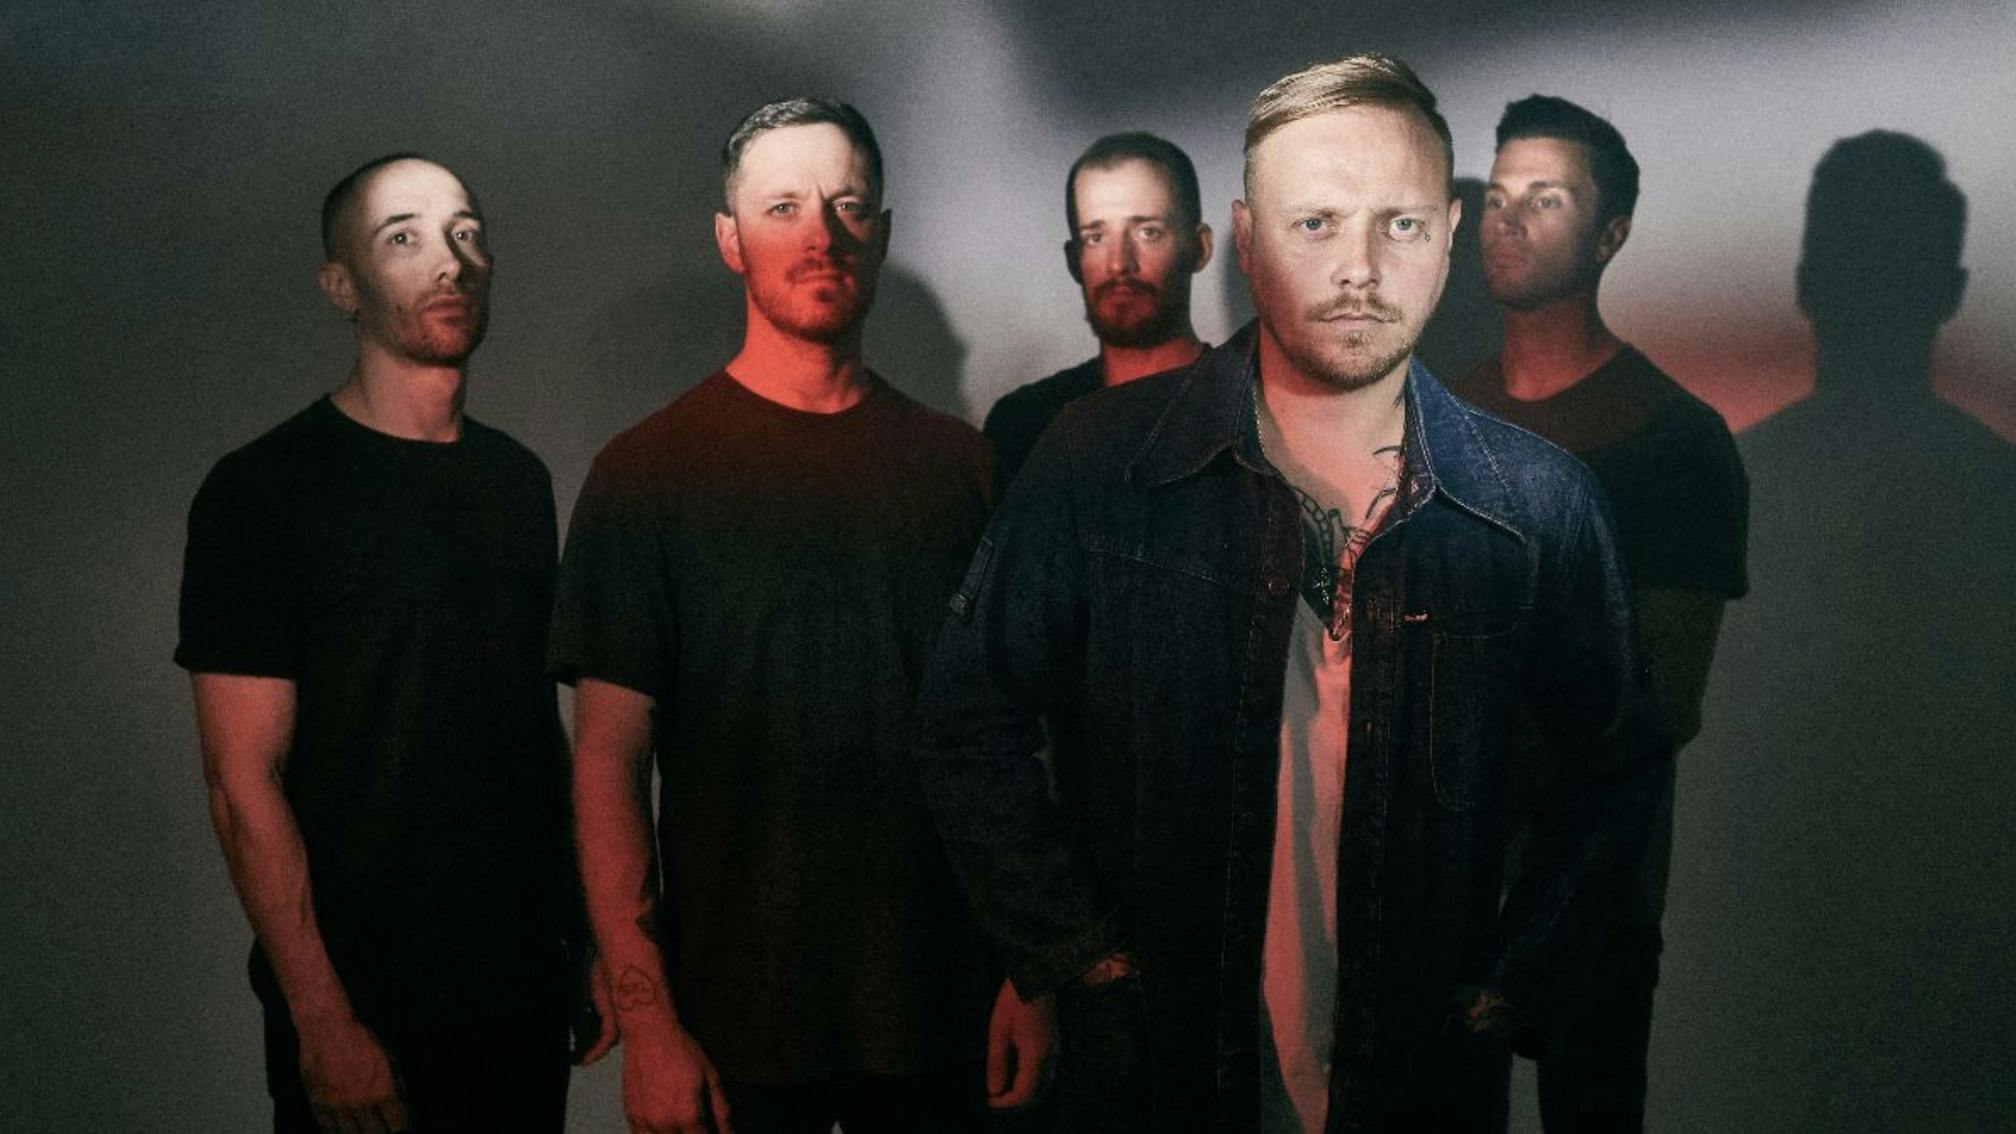 Architects cancel U.S. tour due to “a number of logistical issues”